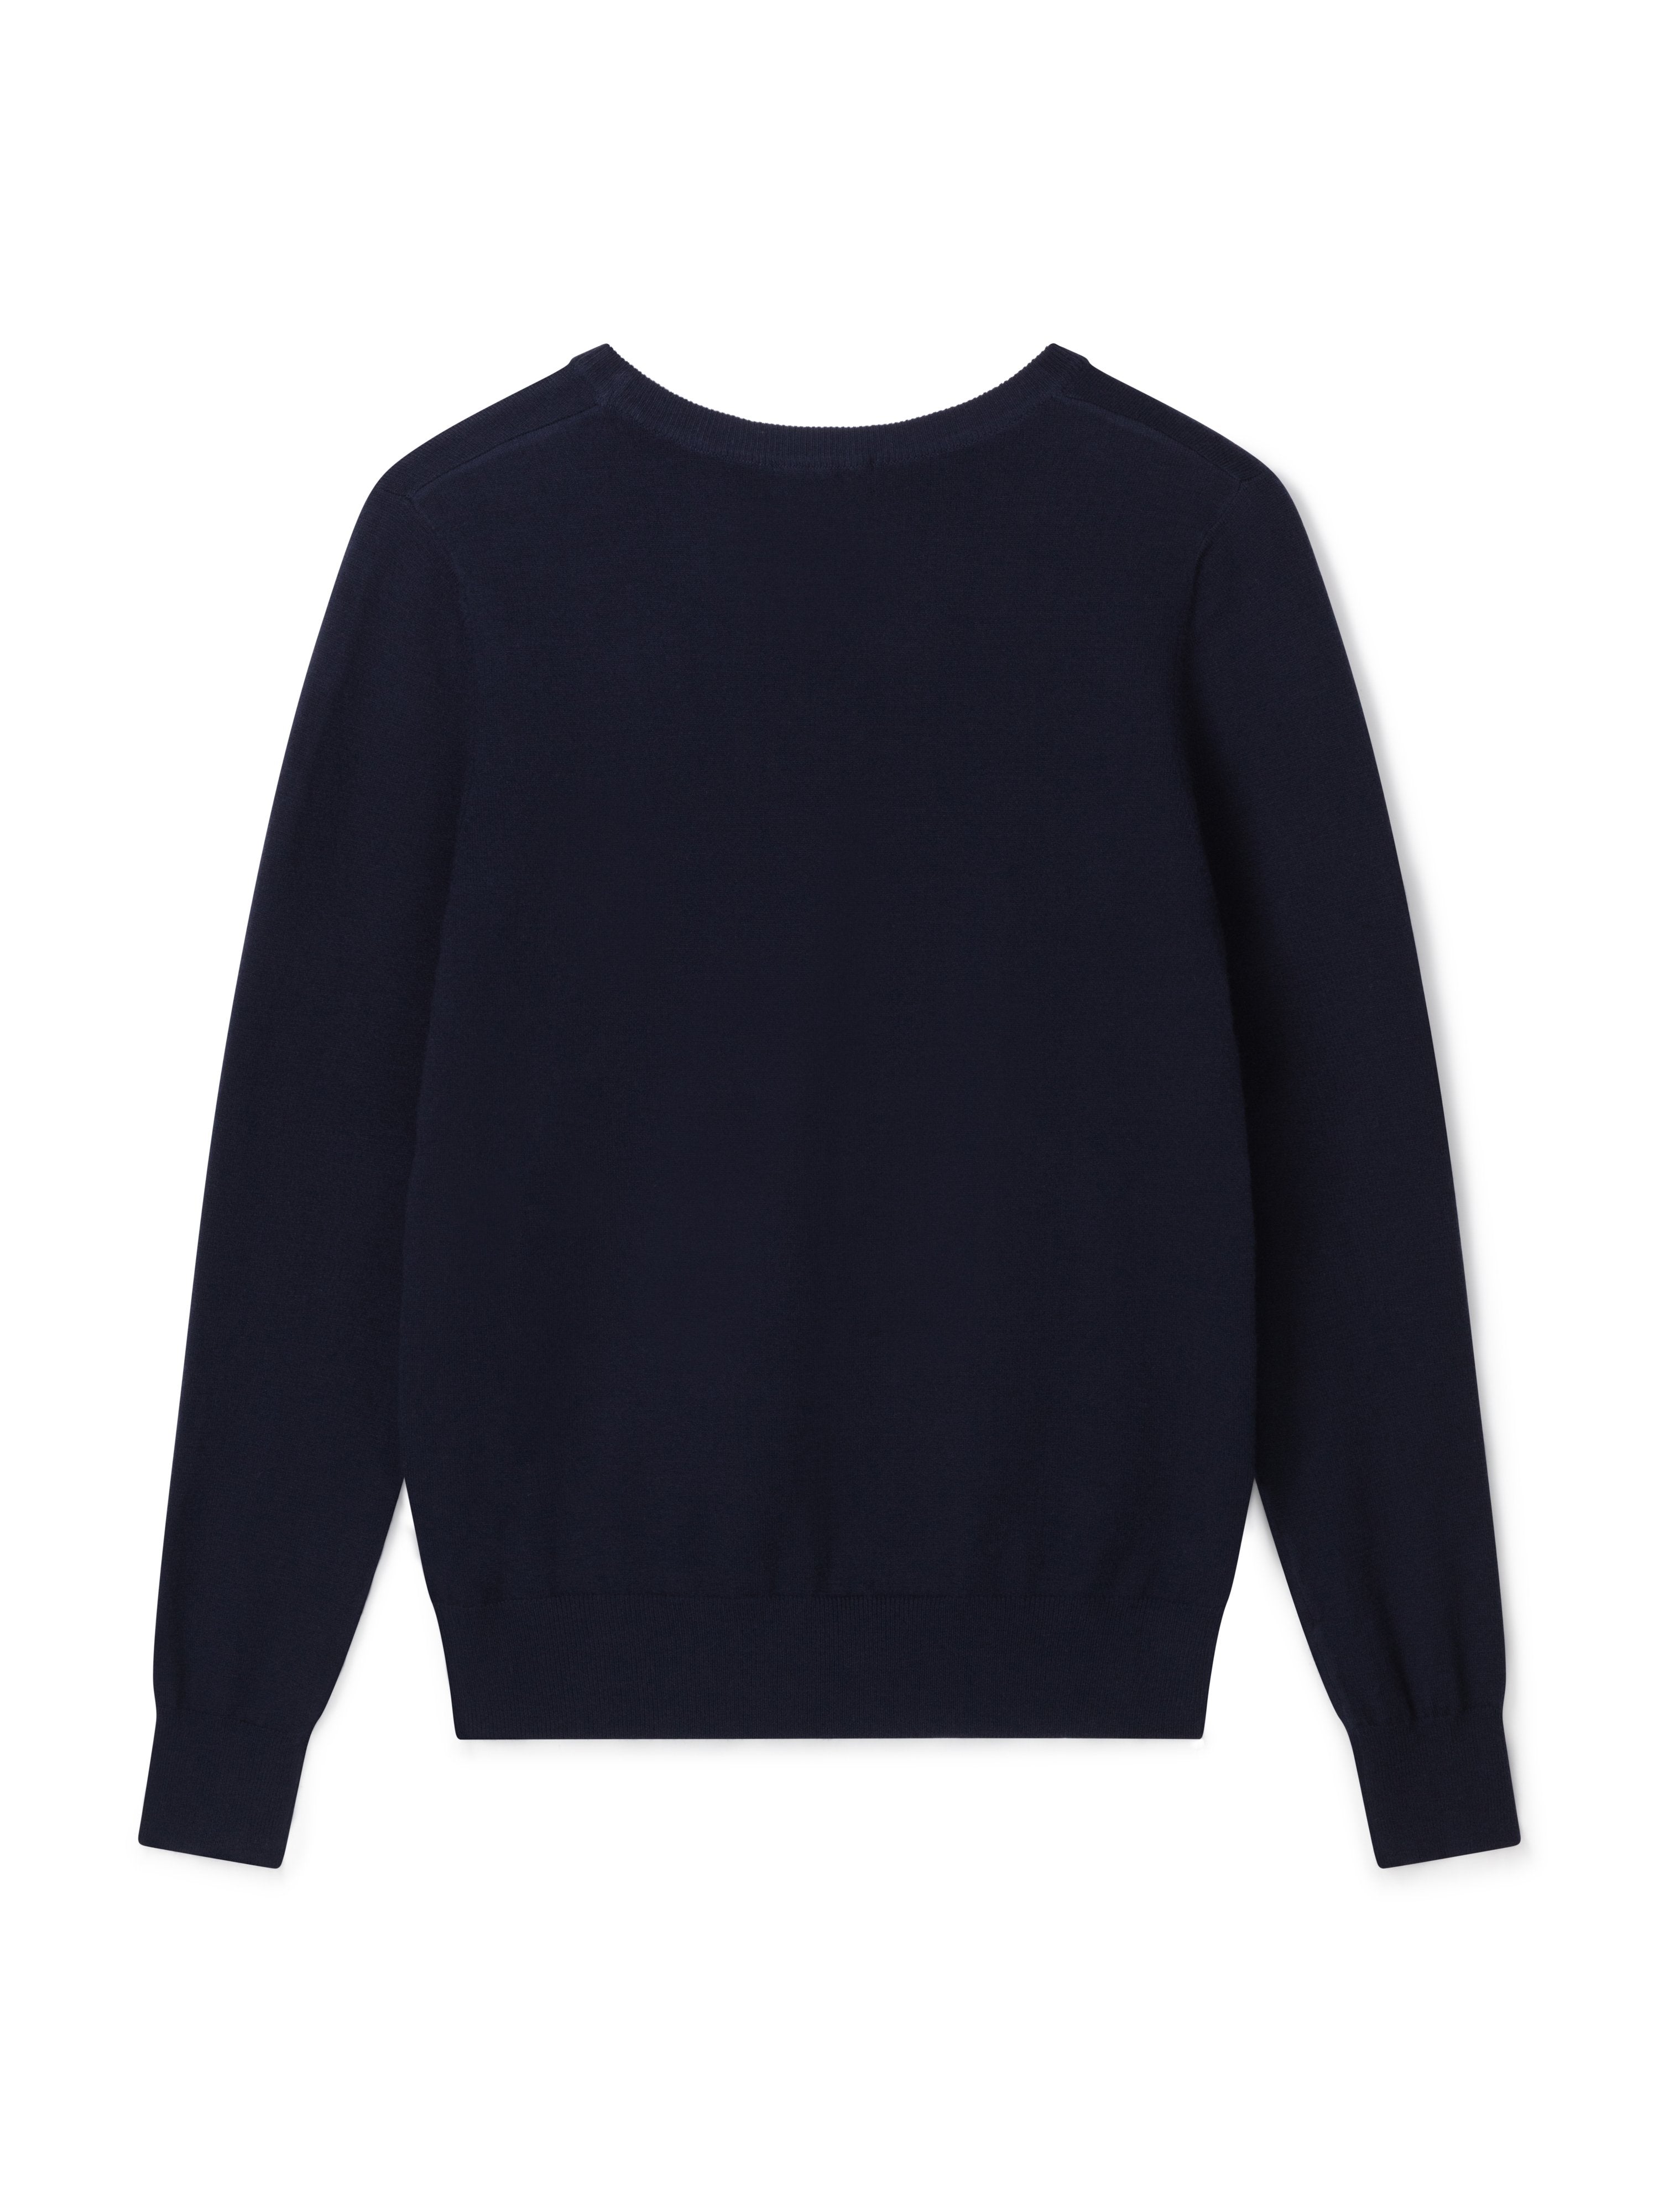 Taylor Jumper | Navy - The Voewood